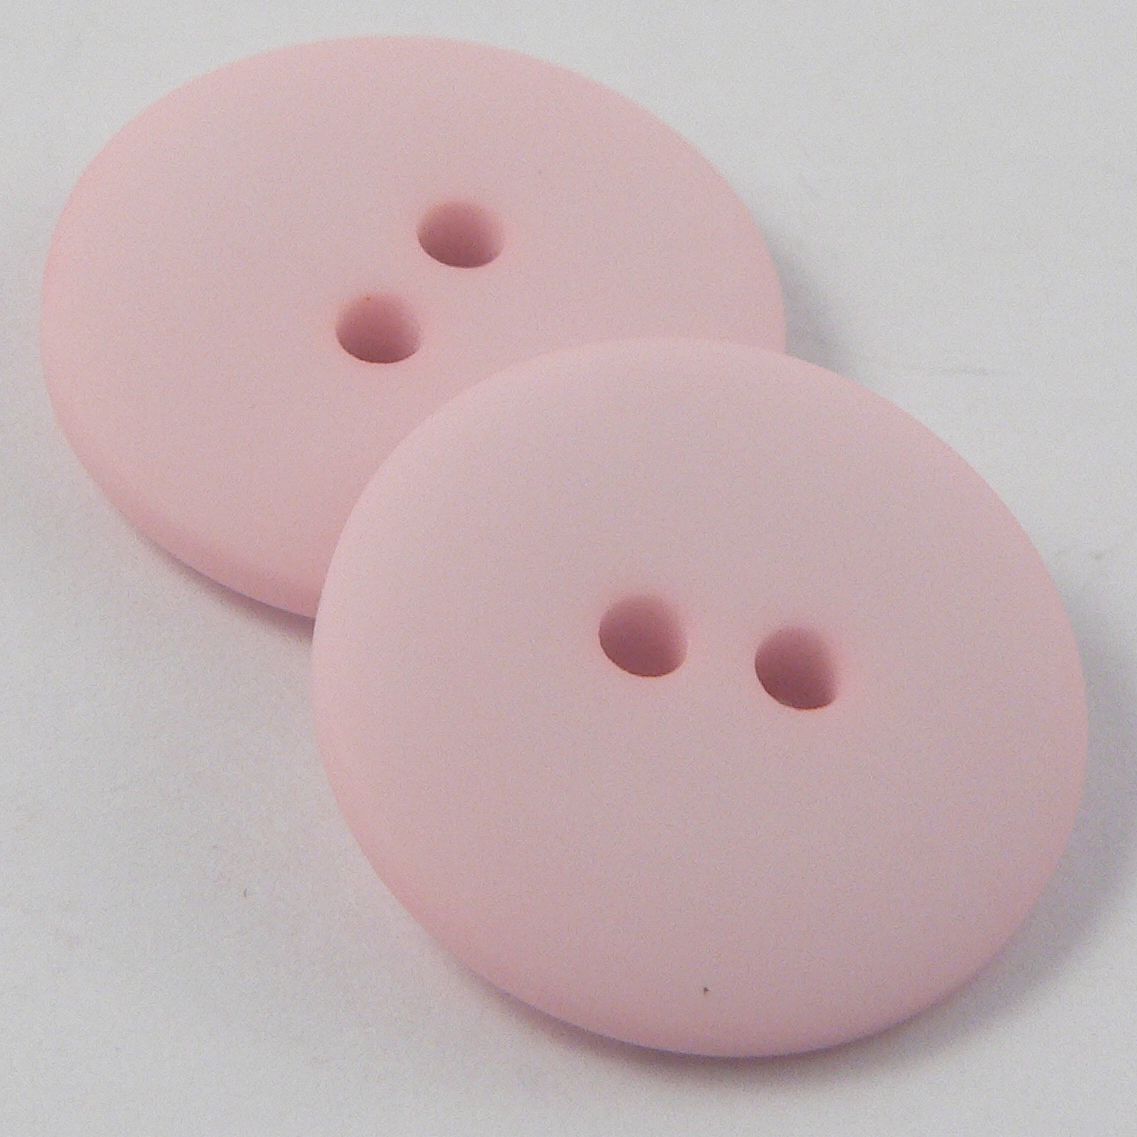 50 11mm Opaque Pearl Pink Flat Round Plastic Two Hole Buttons by Smileyboy | Michaels